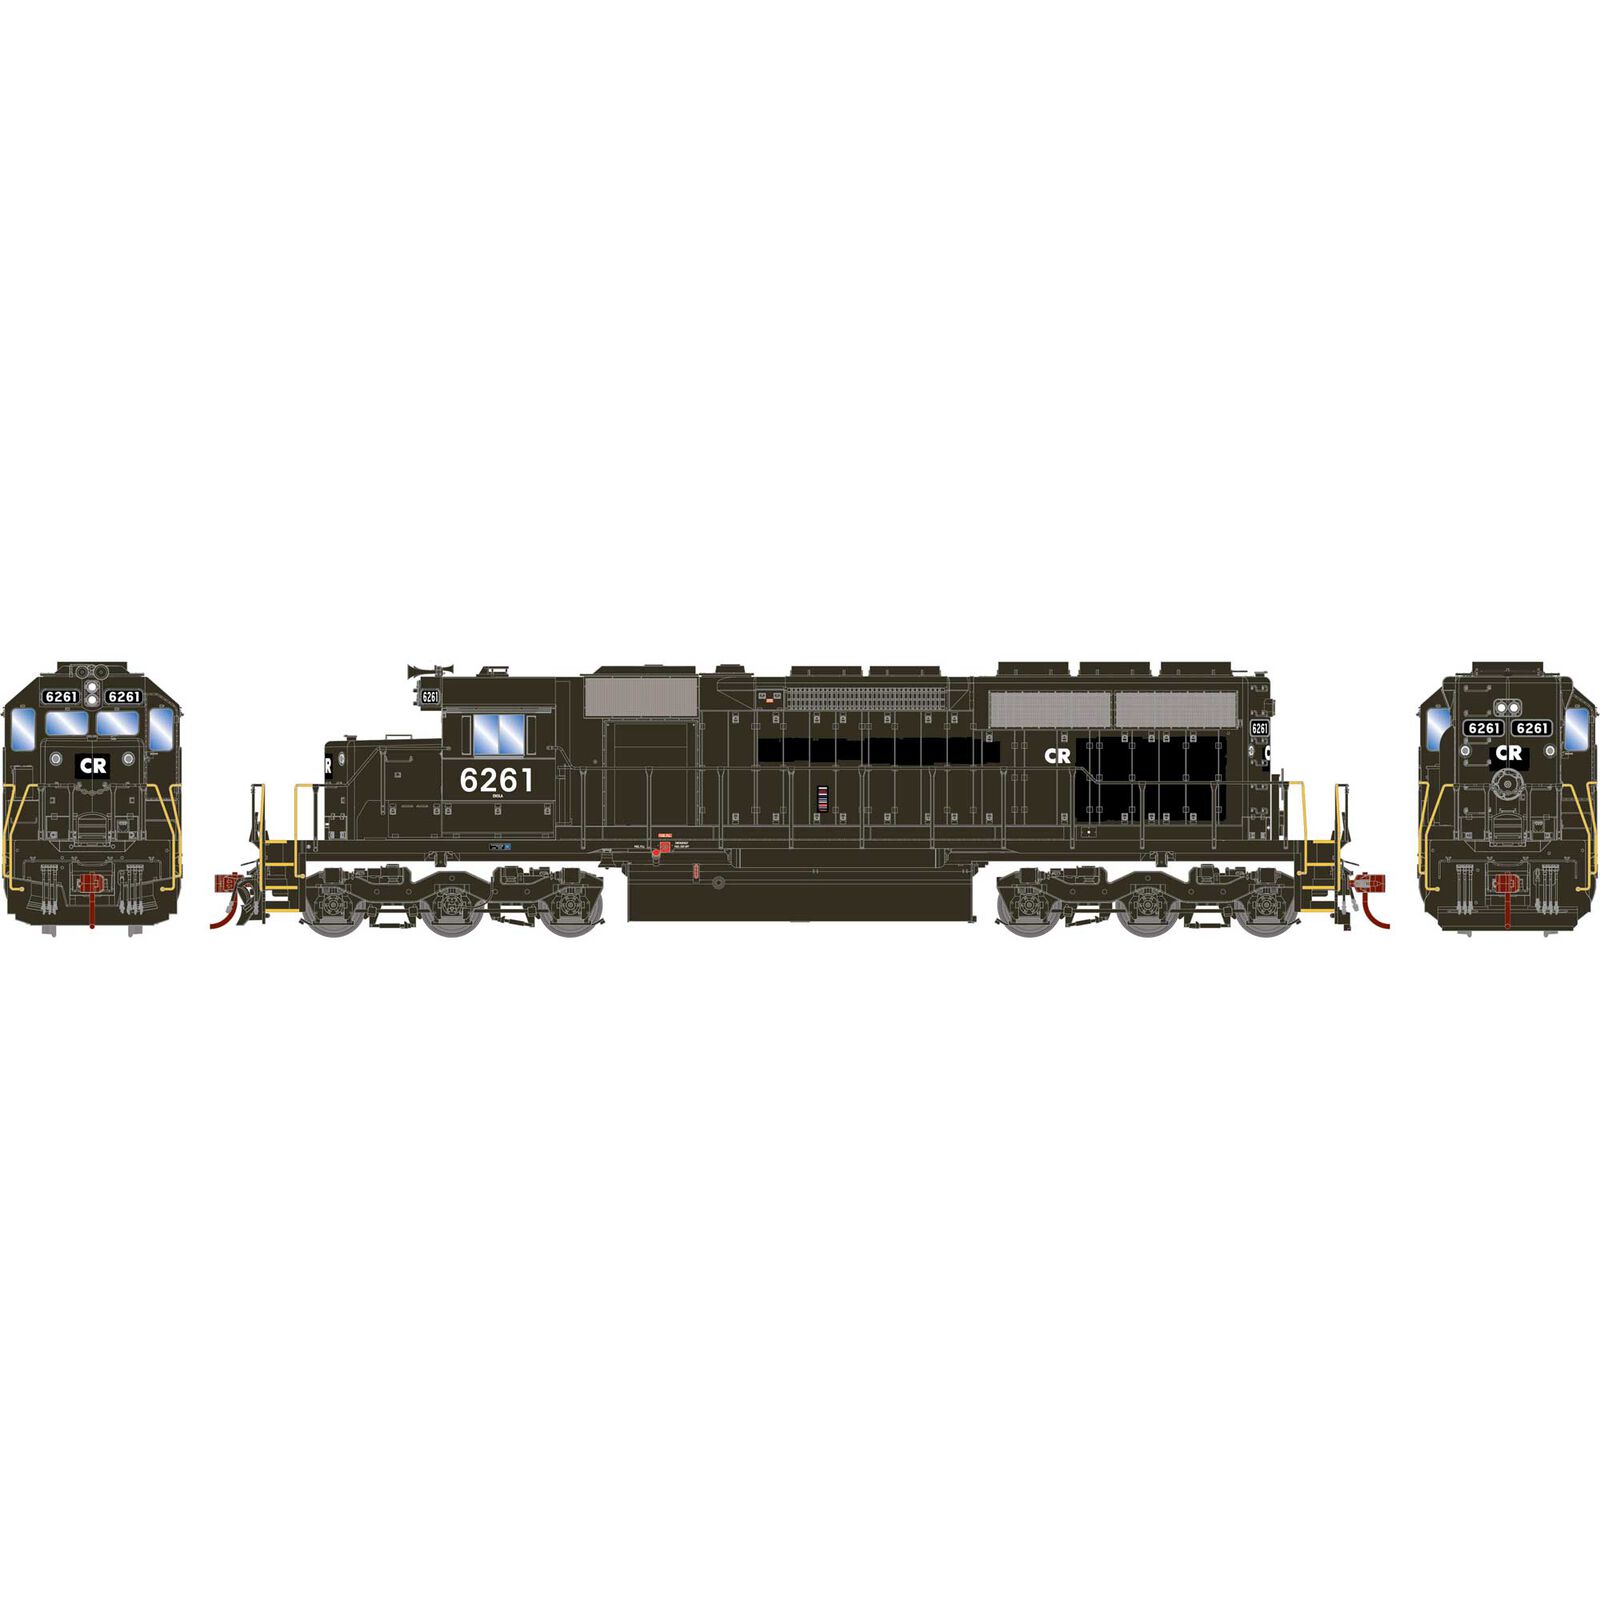 HO SD40 Locomotive with DCC & Sound, CR / PC Patched #6261